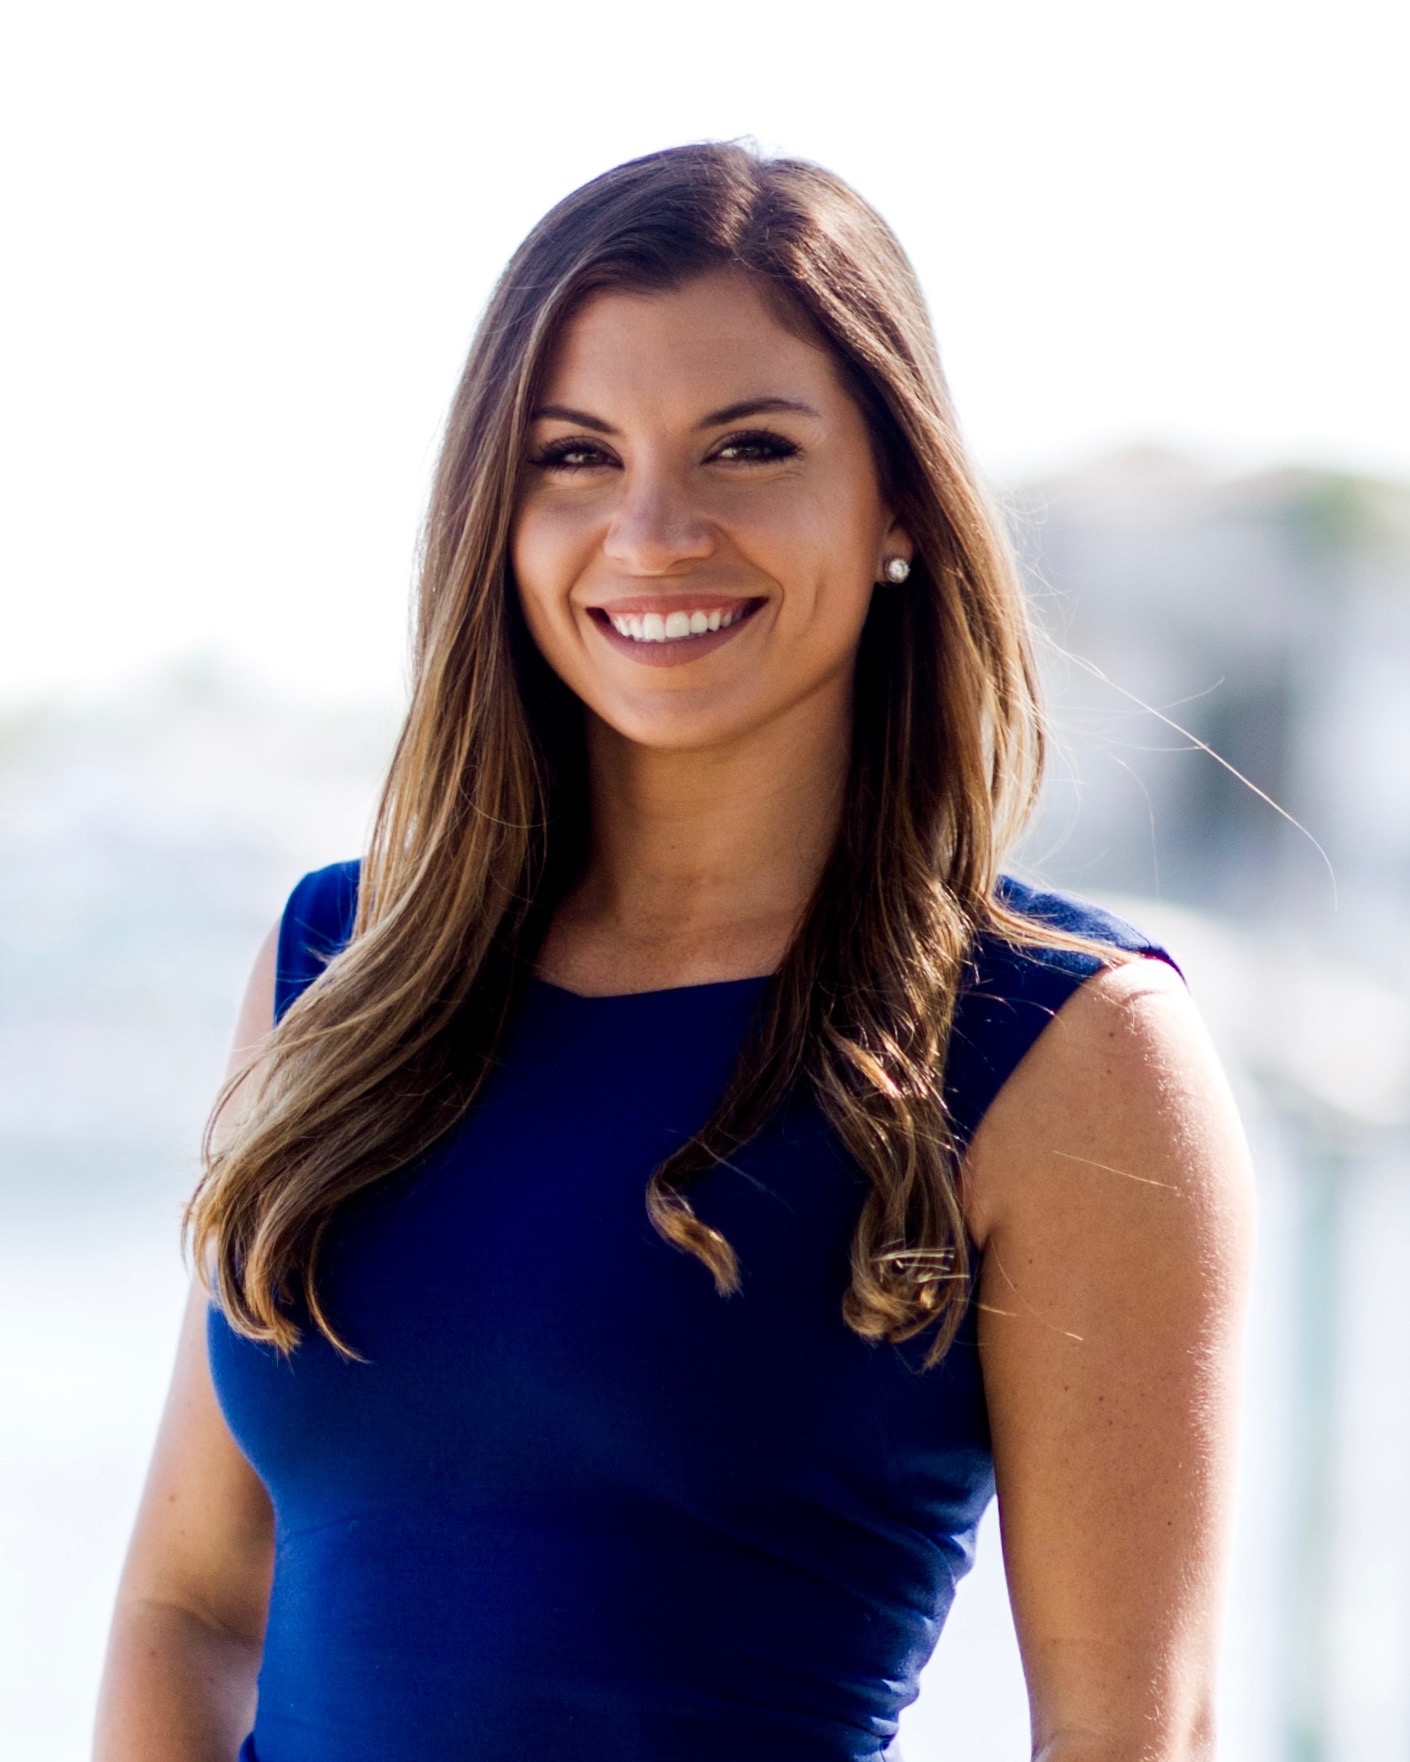 Portrait of Samantha Goldfarb, REALTOR® - Top Producer South Florida - South Florida Office Manager.